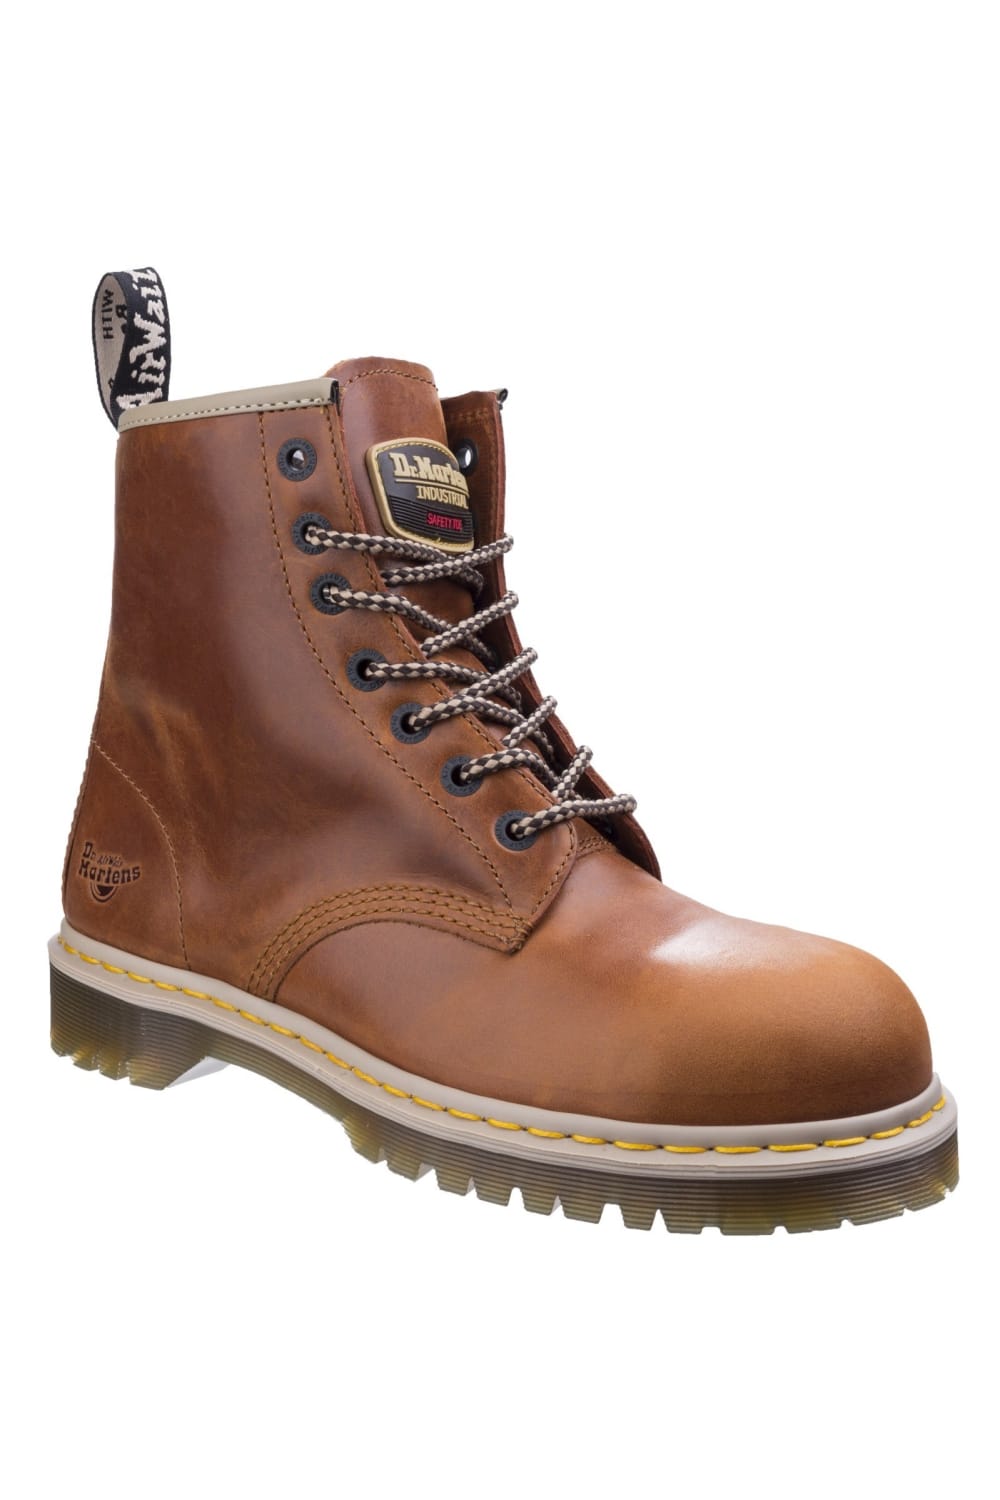 Unisex Icon 7B10 Safety Boots - Tan